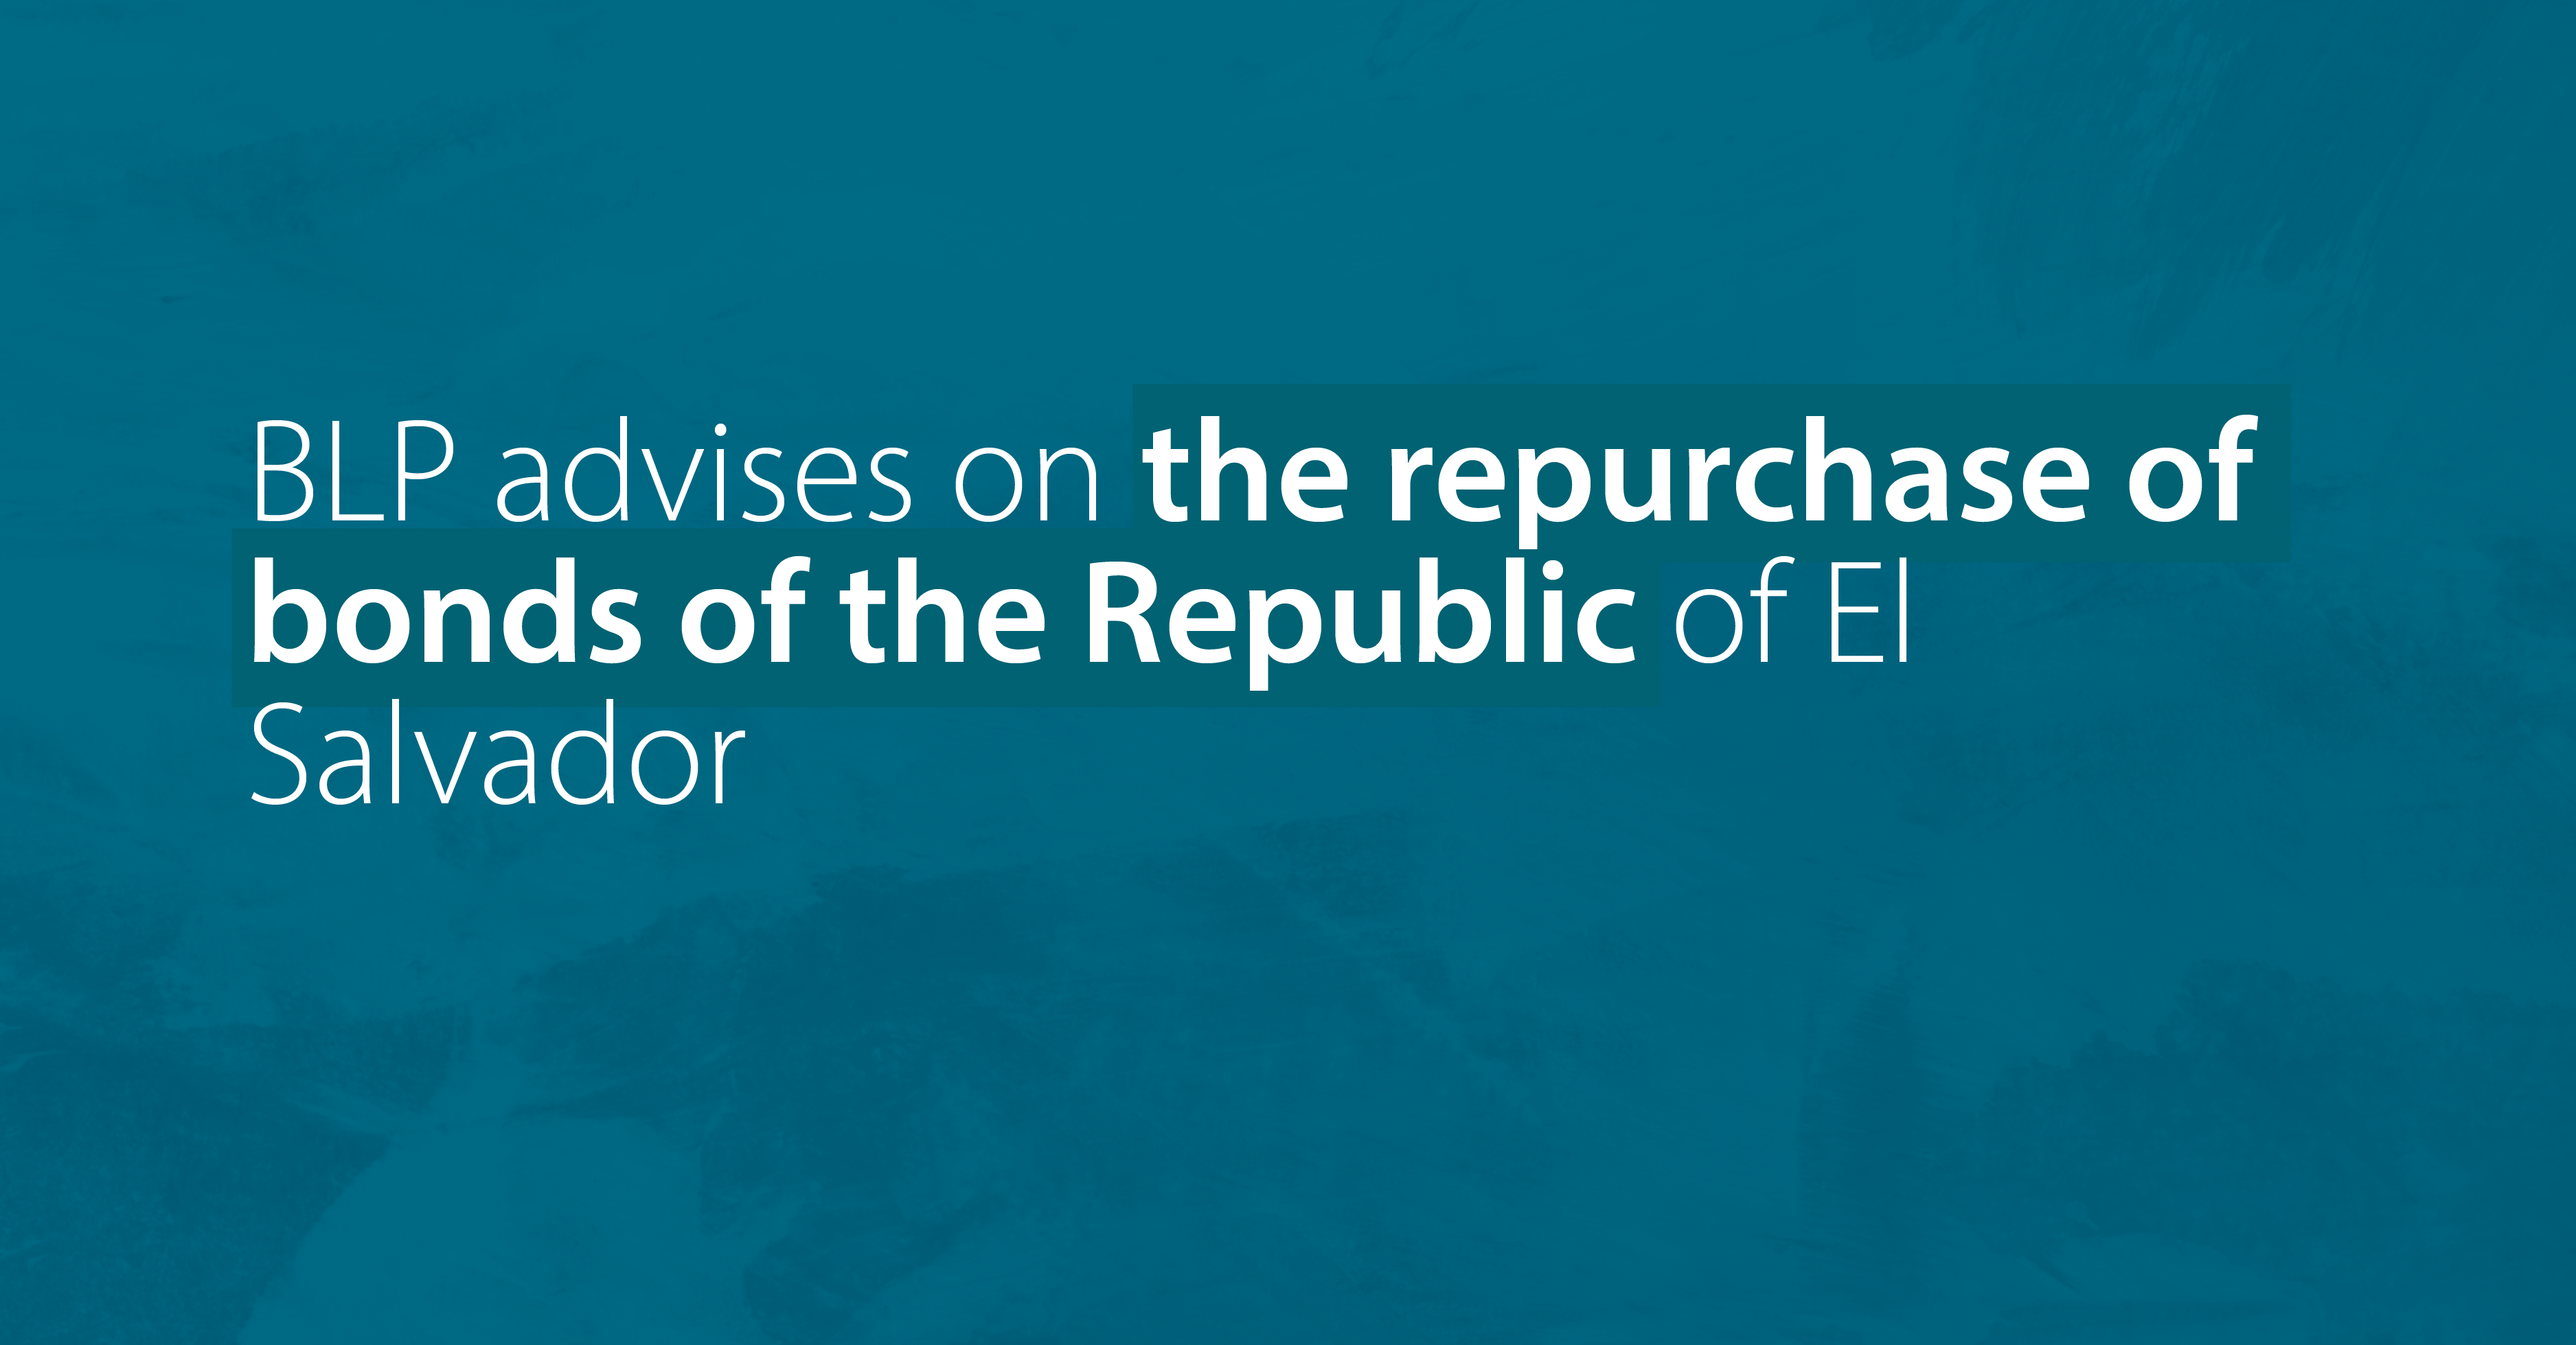 BLP advises on the repurchase of bonds of the Republic of El Salvador